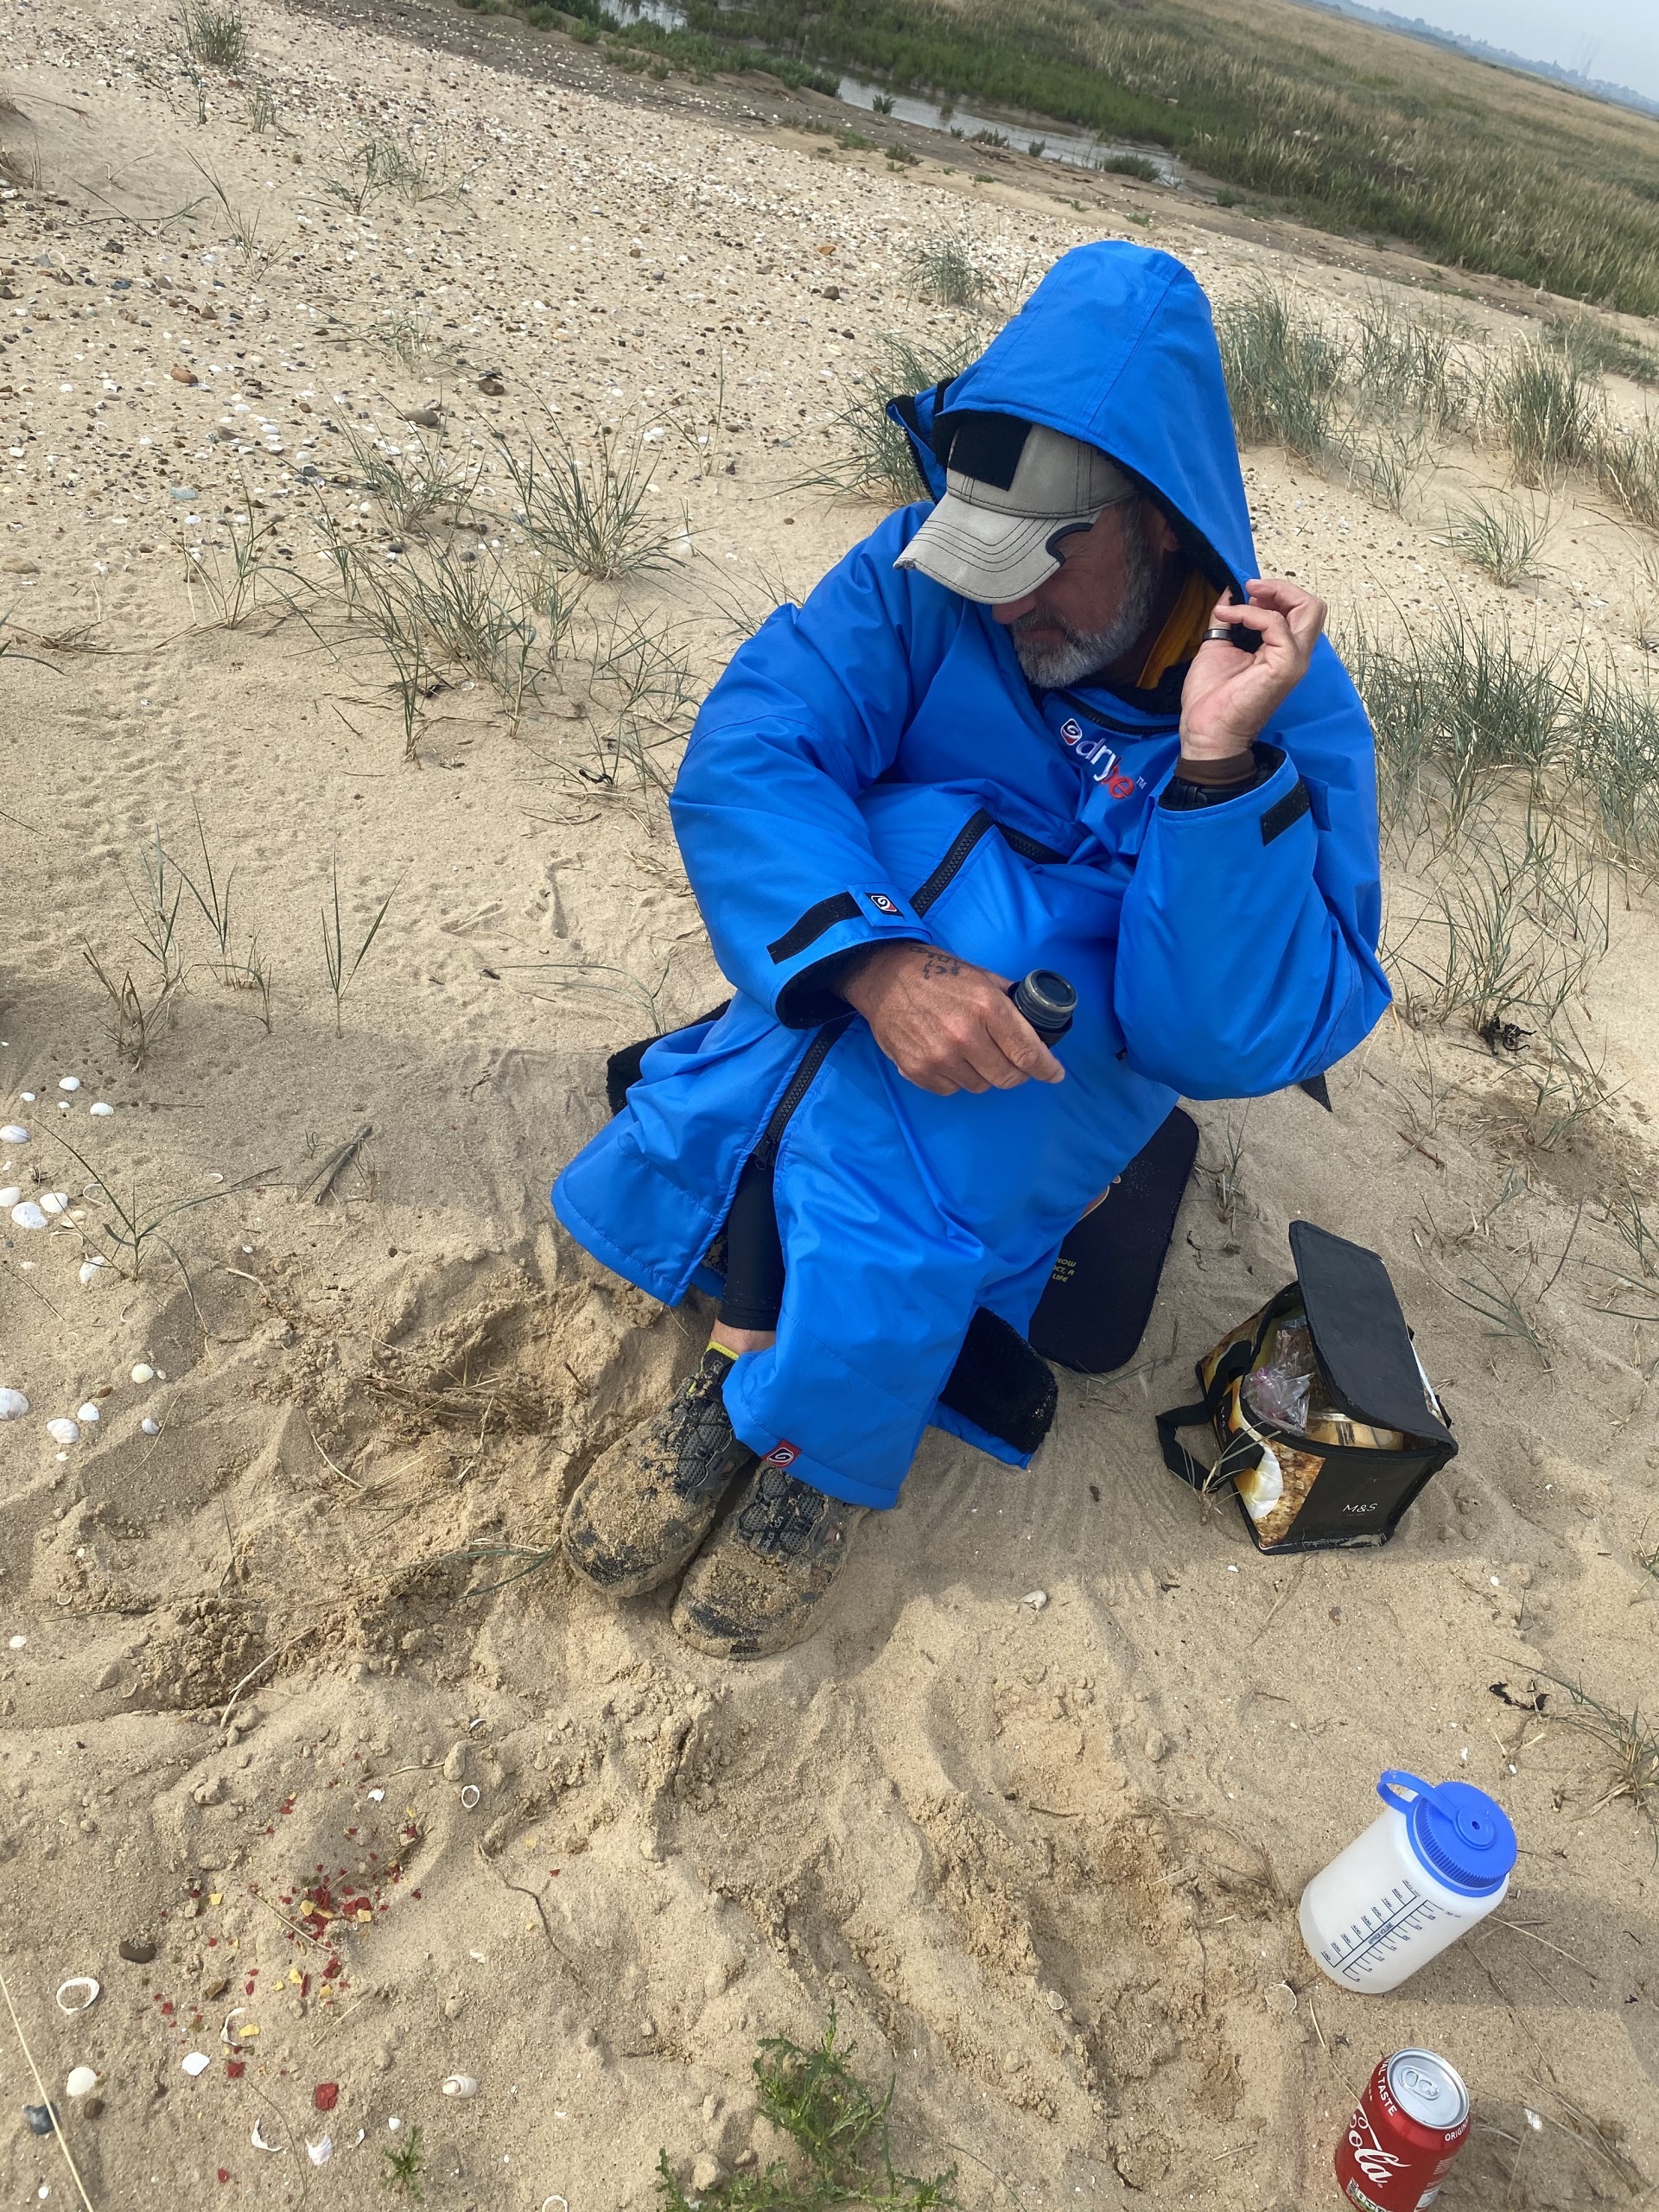 A sea kayak guide on a sandy beach with warm clothing taking a break